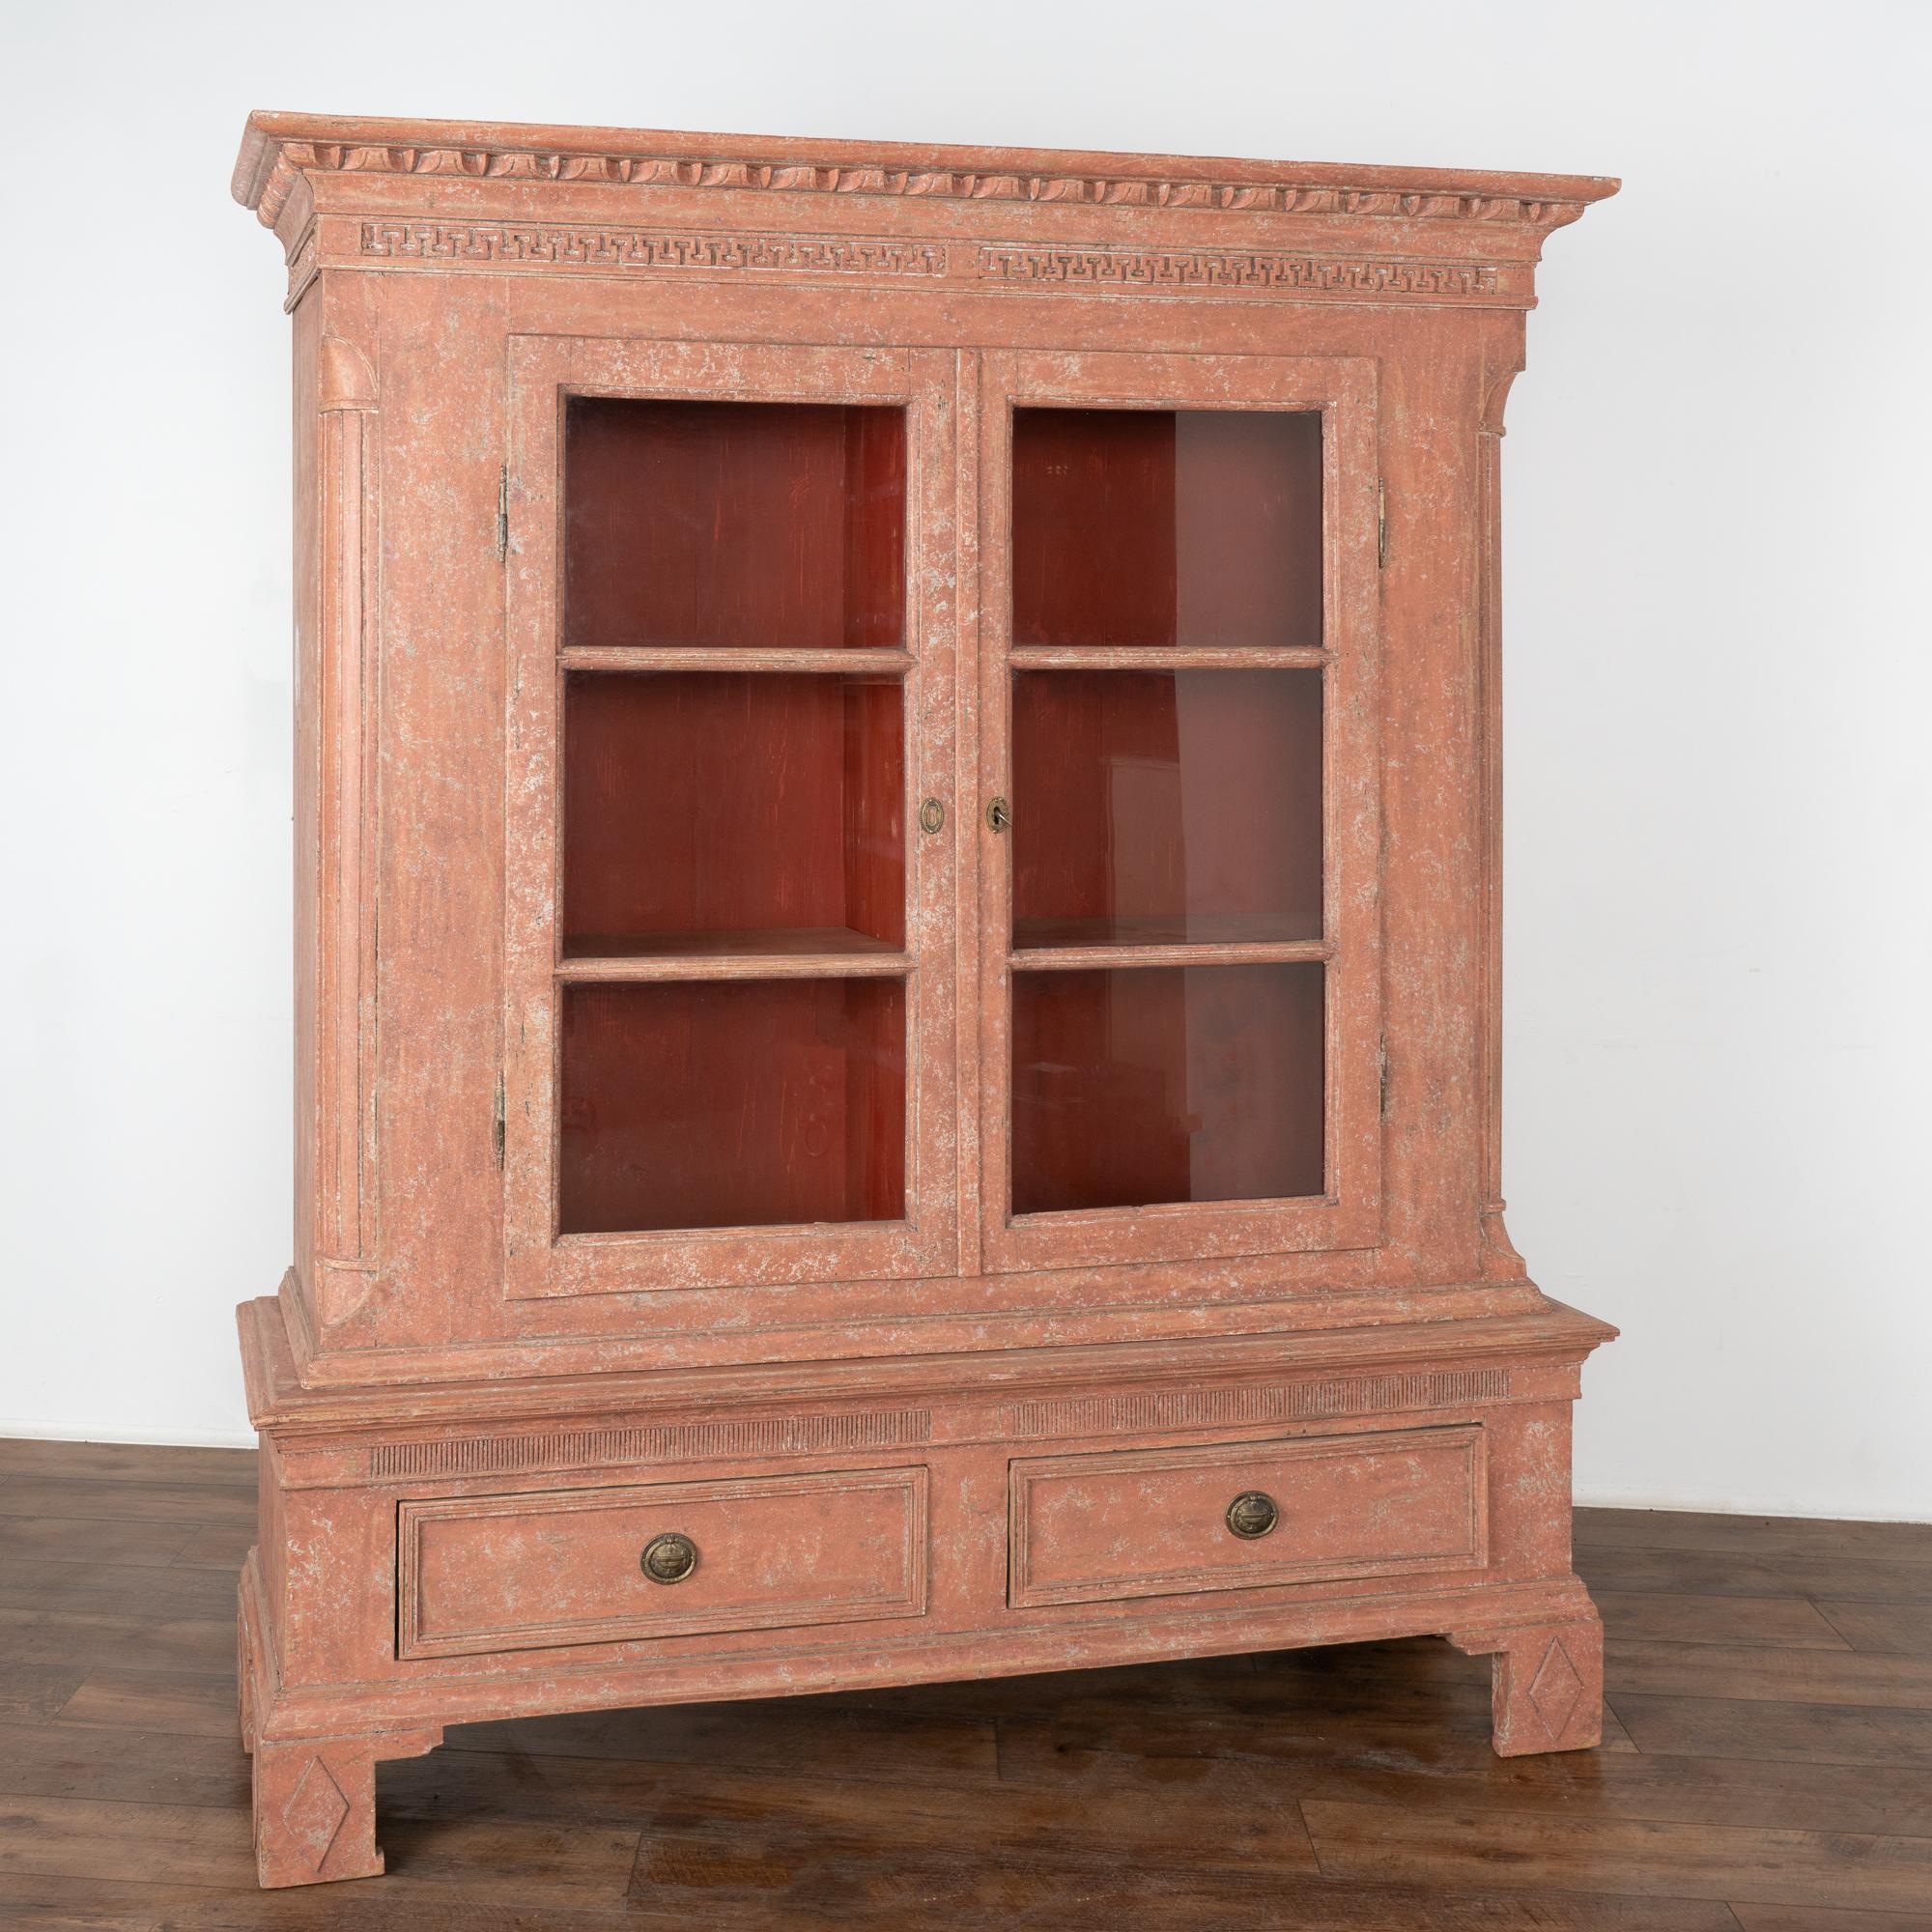 The details in this large red Gustavian pine bookcase are impressive with carved molding and Greek key pattern along the crown, carved inset columns at side and fluted carved details along base. 
The upper glass doors allow for beautiful display of